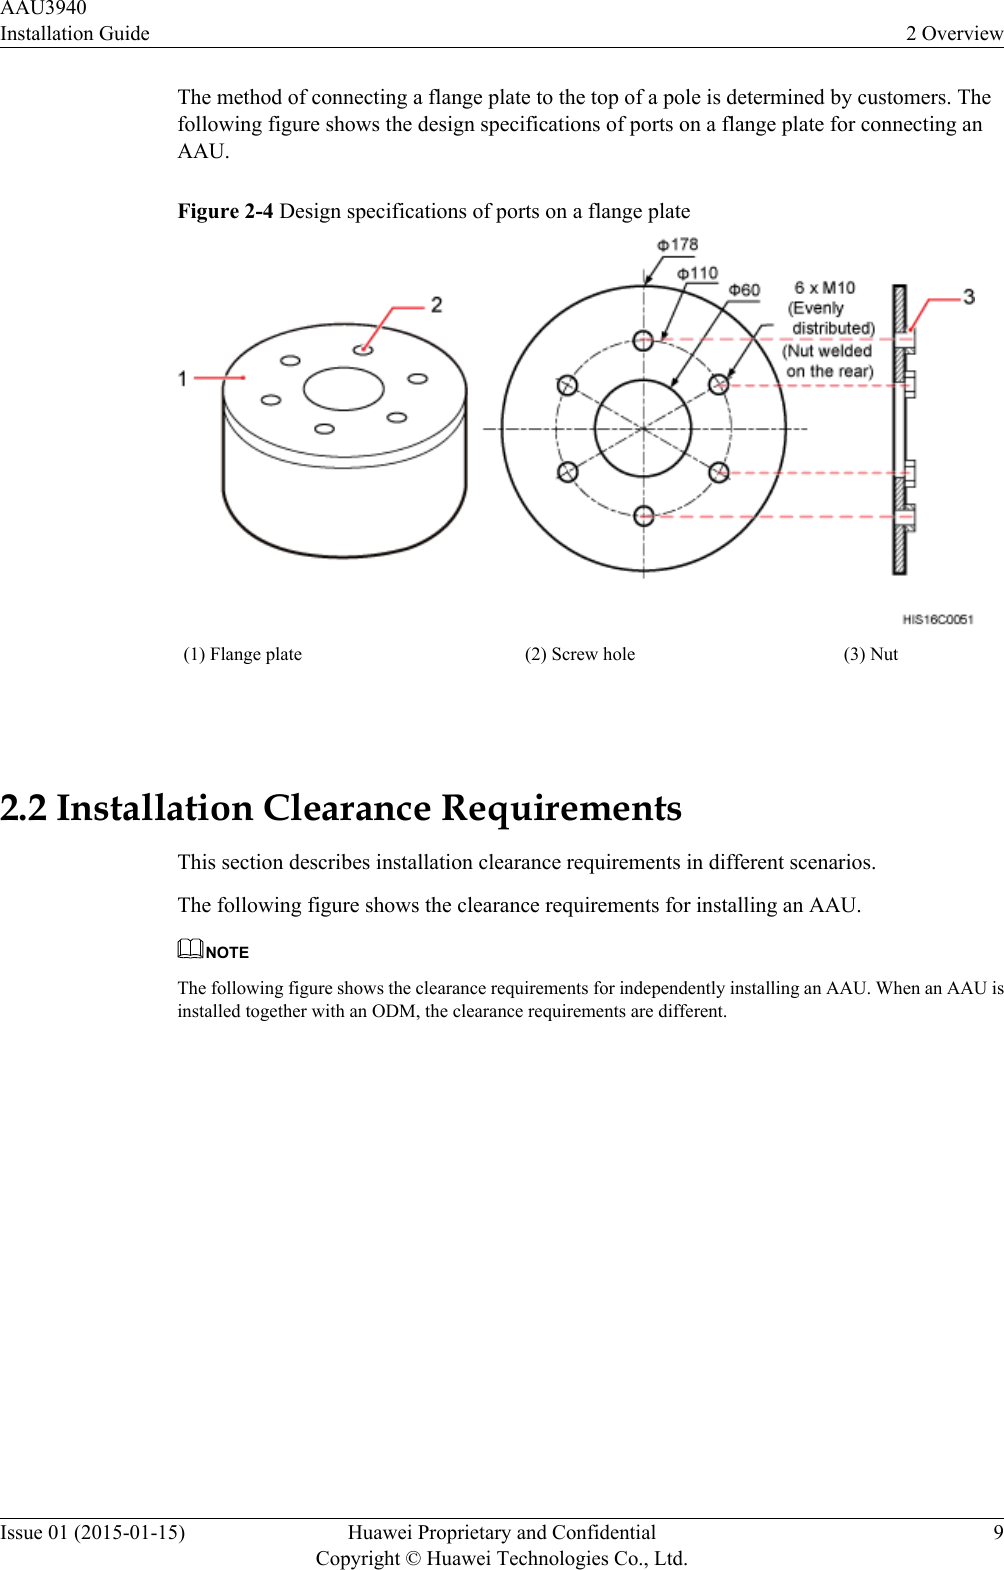 The method of connecting a flange plate to the top of a pole is determined by customers. Thefollowing figure shows the design specifications of ports on a flange plate for connecting anAAU.Figure 2-4 Design specifications of ports on a flange plate(1) Flange plate (2) Screw hole (3) Nut 2.2 Installation Clearance RequirementsThis section describes installation clearance requirements in different scenarios.The following figure shows the clearance requirements for installing an AAU.NOTEThe following figure shows the clearance requirements for independently installing an AAU. When an AAU isinstalled together with an ODM, the clearance requirements are different.AAU3940Installation Guide 2 OverviewIssue 01 (2015-01-15) Huawei Proprietary and ConfidentialCopyright © Huawei Technologies Co., Ltd.9